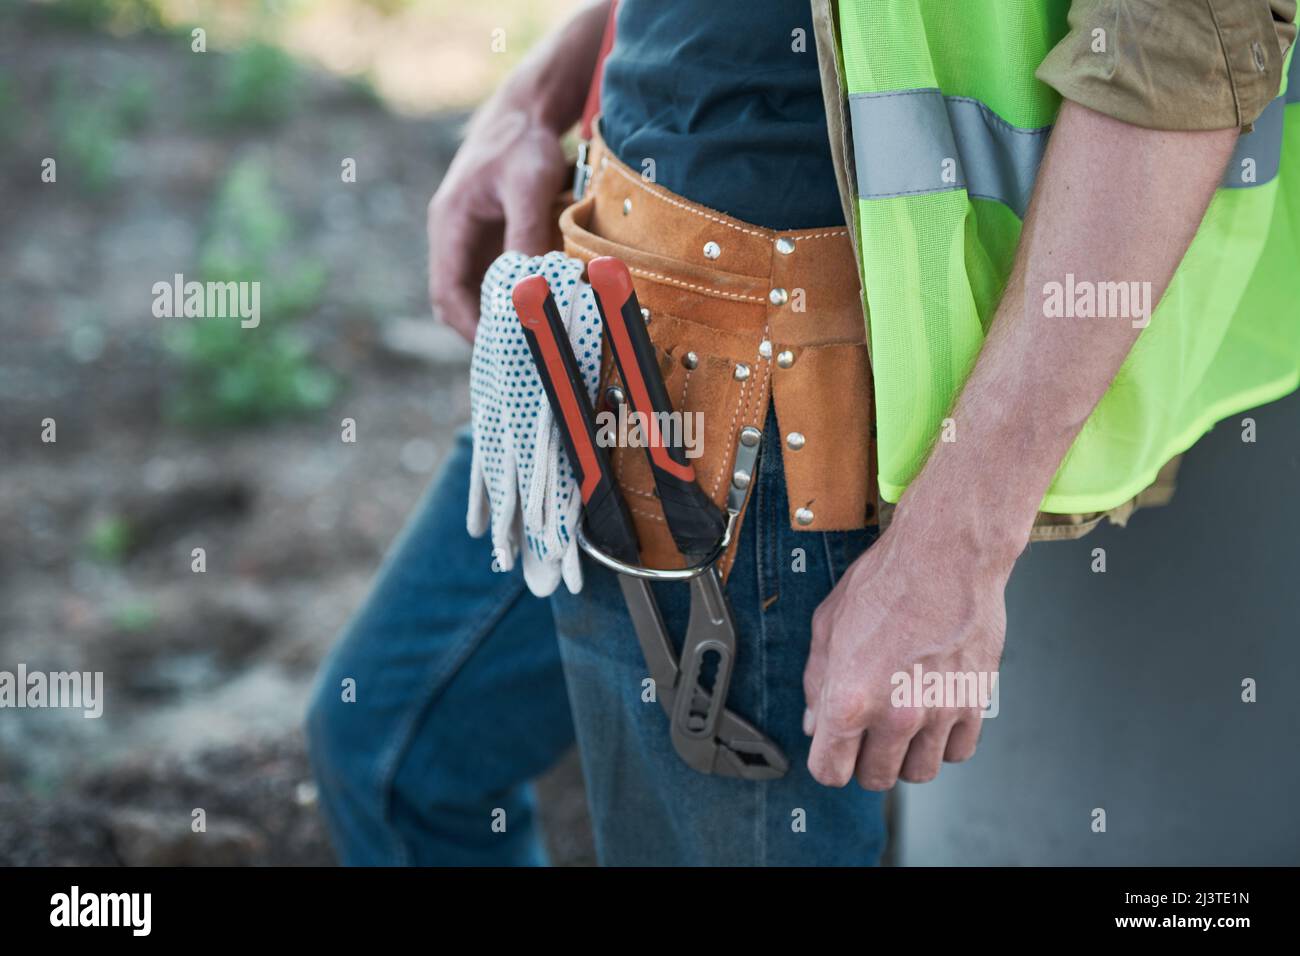 Unrecognizable workman wearing green vest and holding toolbox on construction site Stock Photo